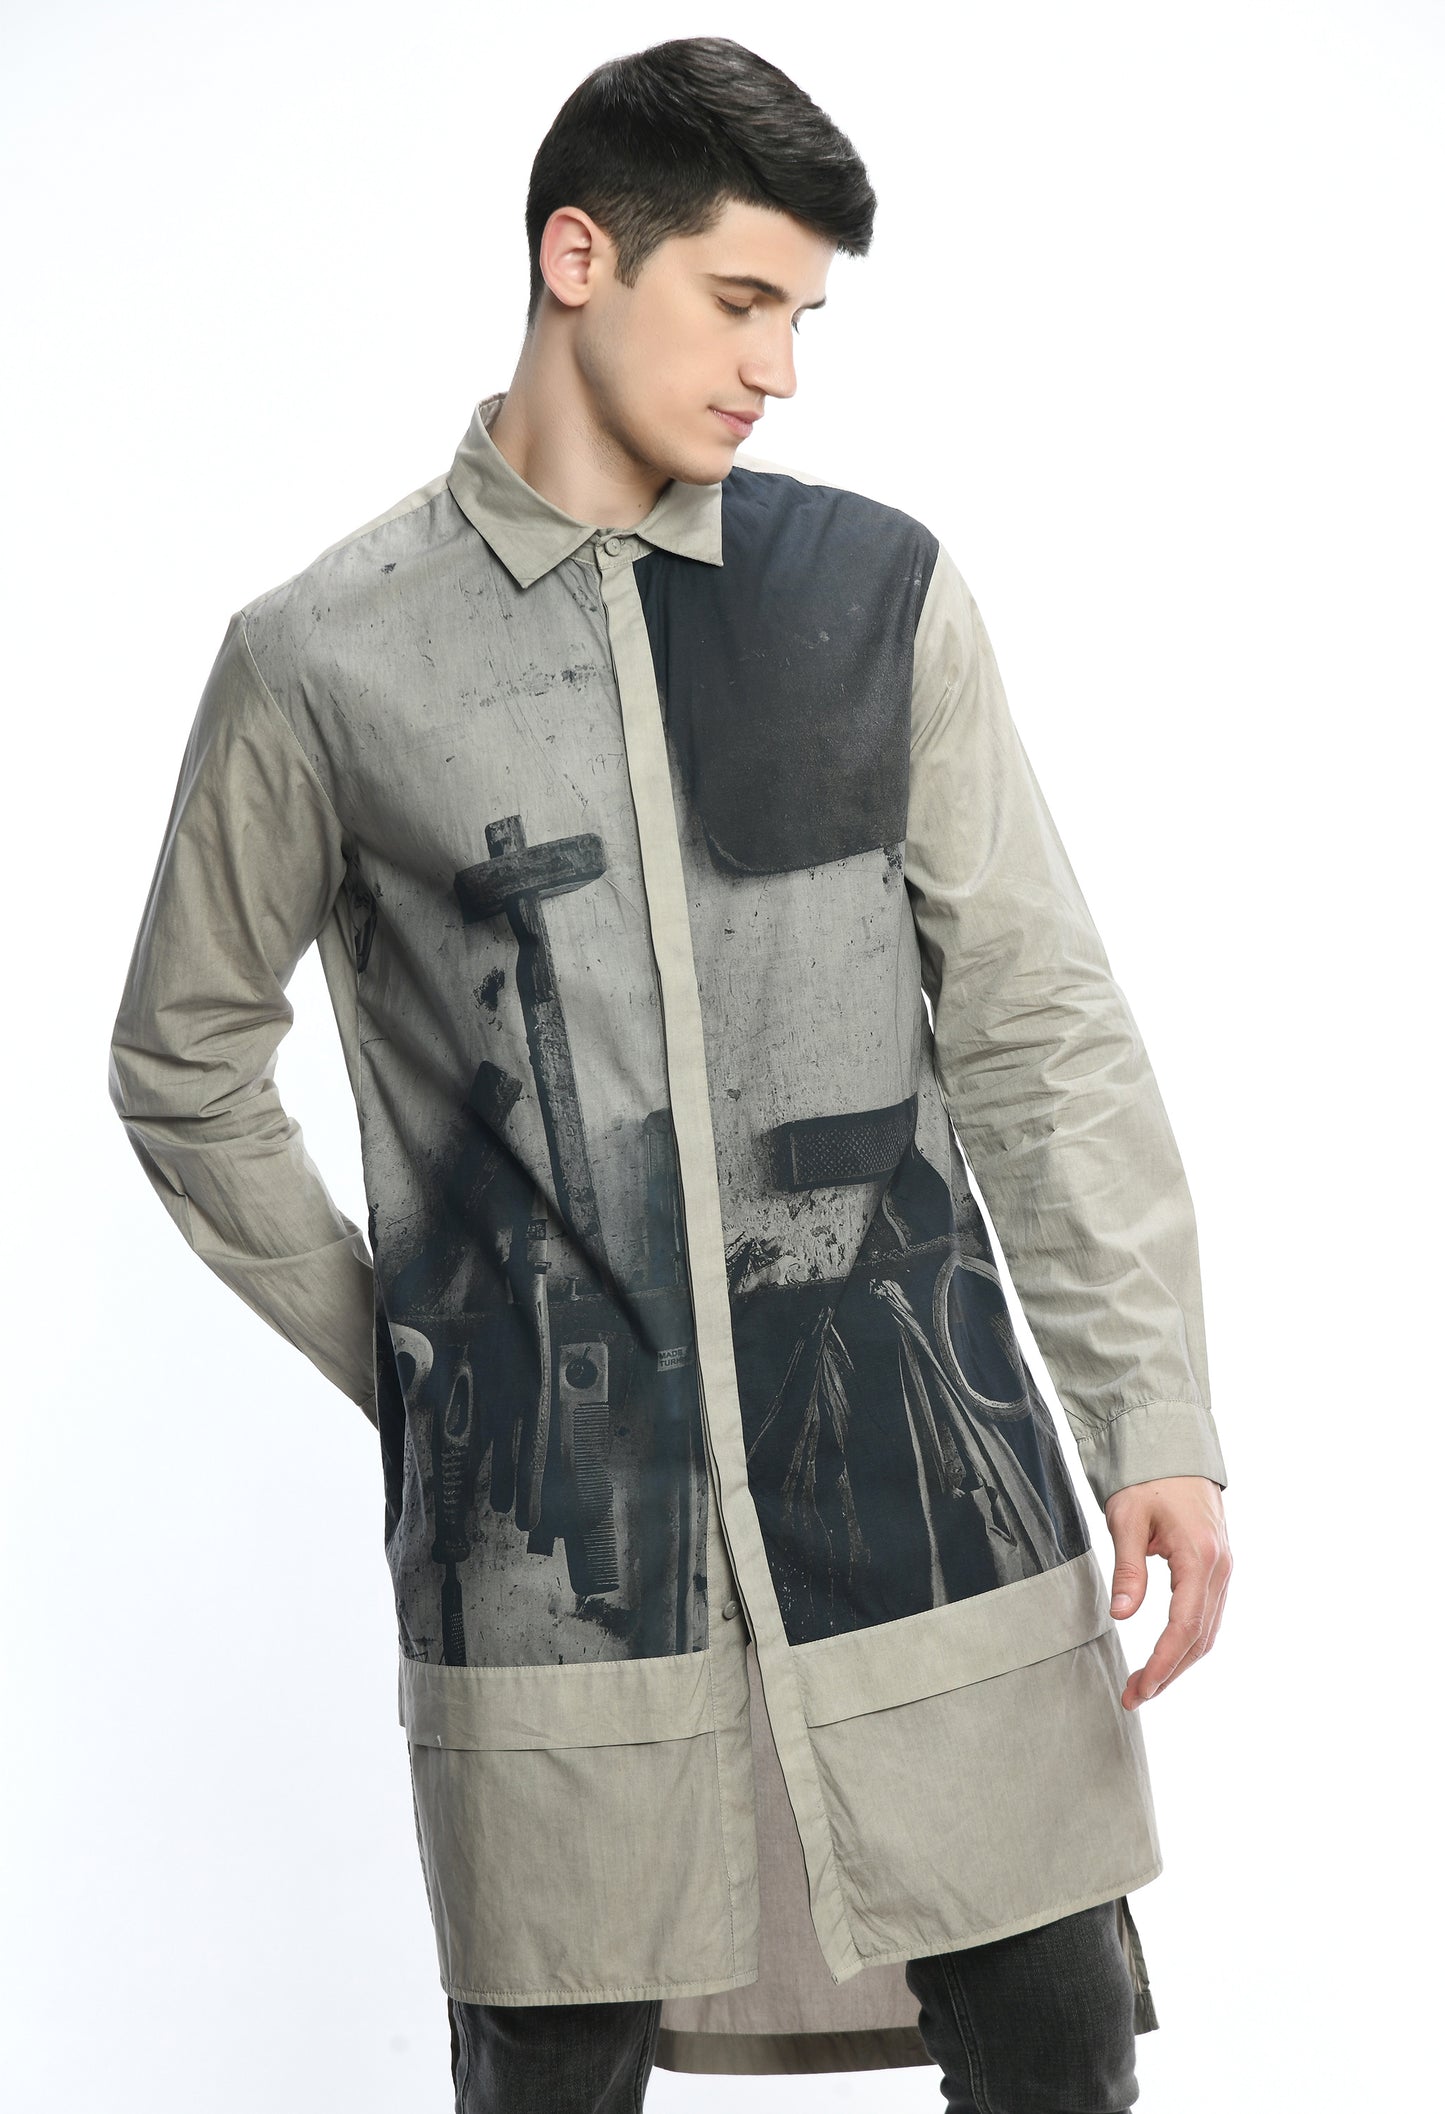 Space Grey high low, stylish cotton shirt with digital print on it